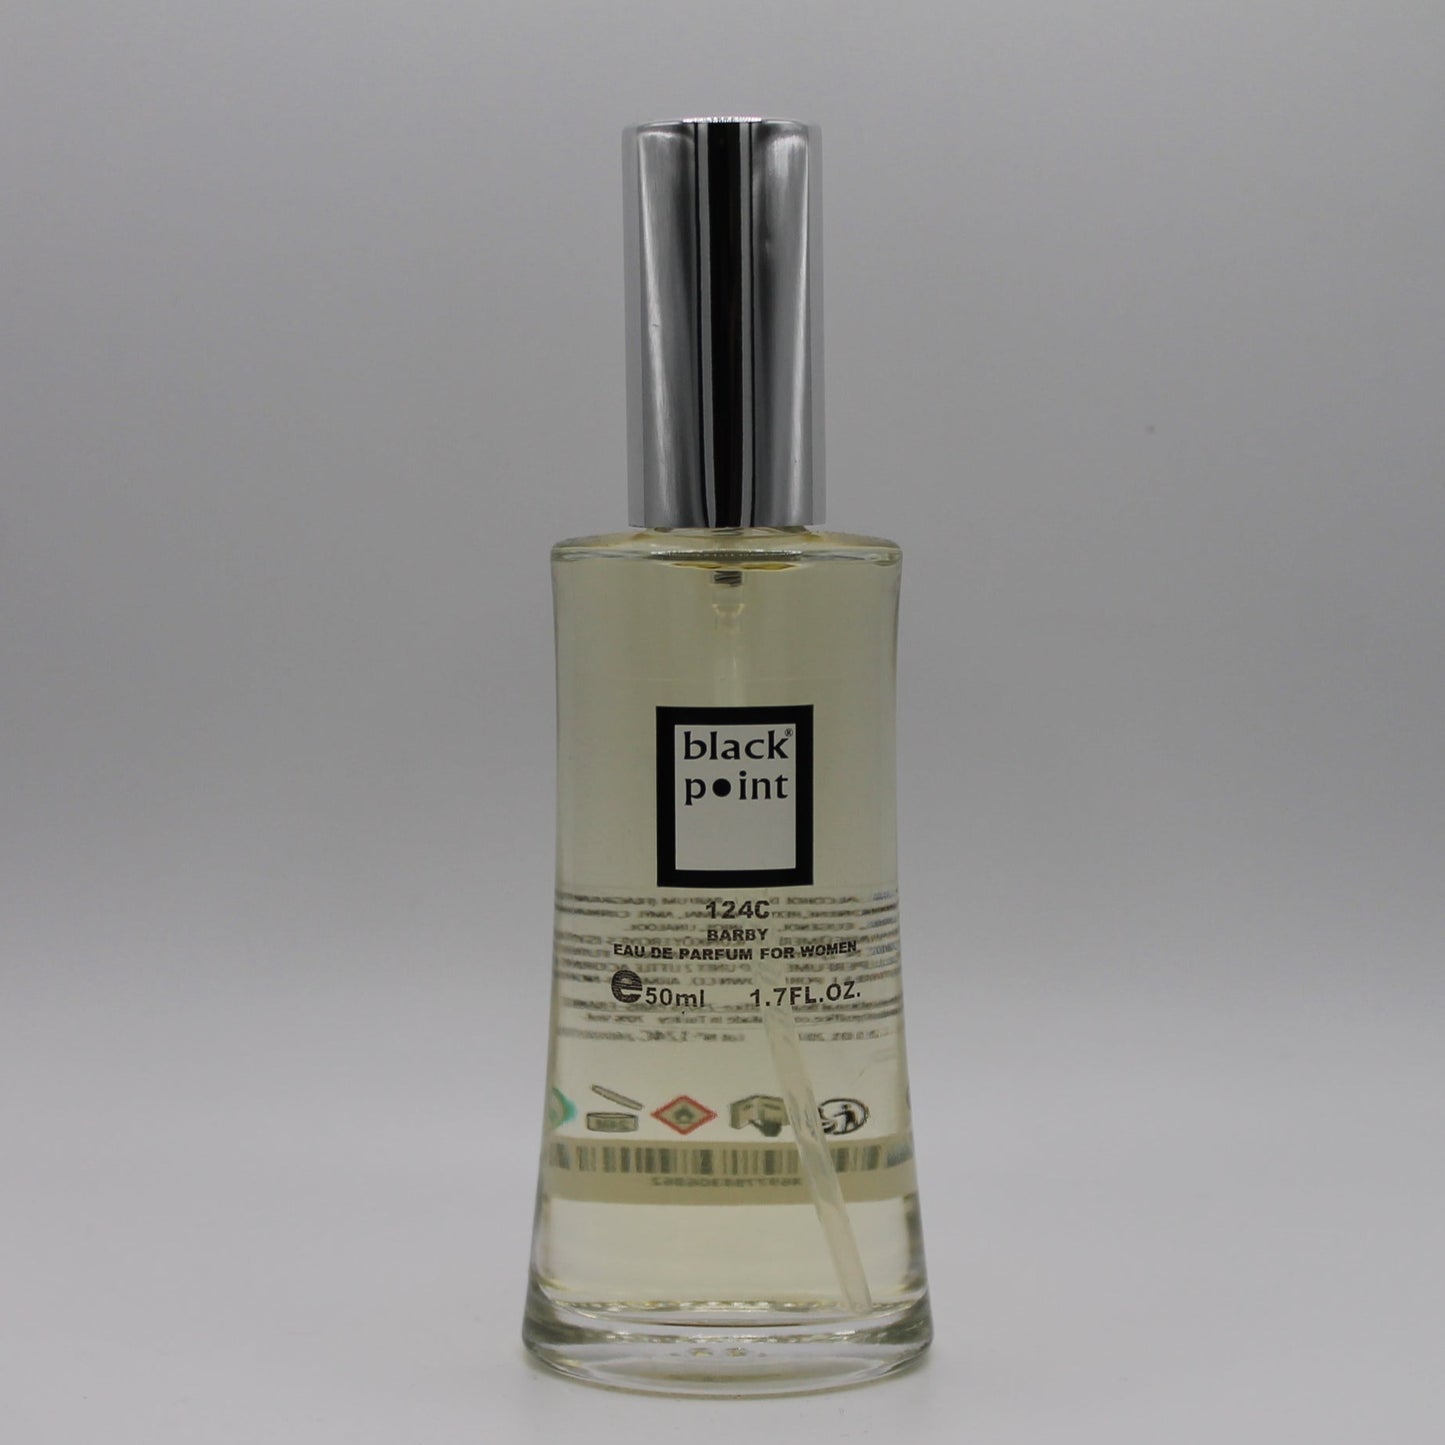 Barby Fragrance For Her - C124